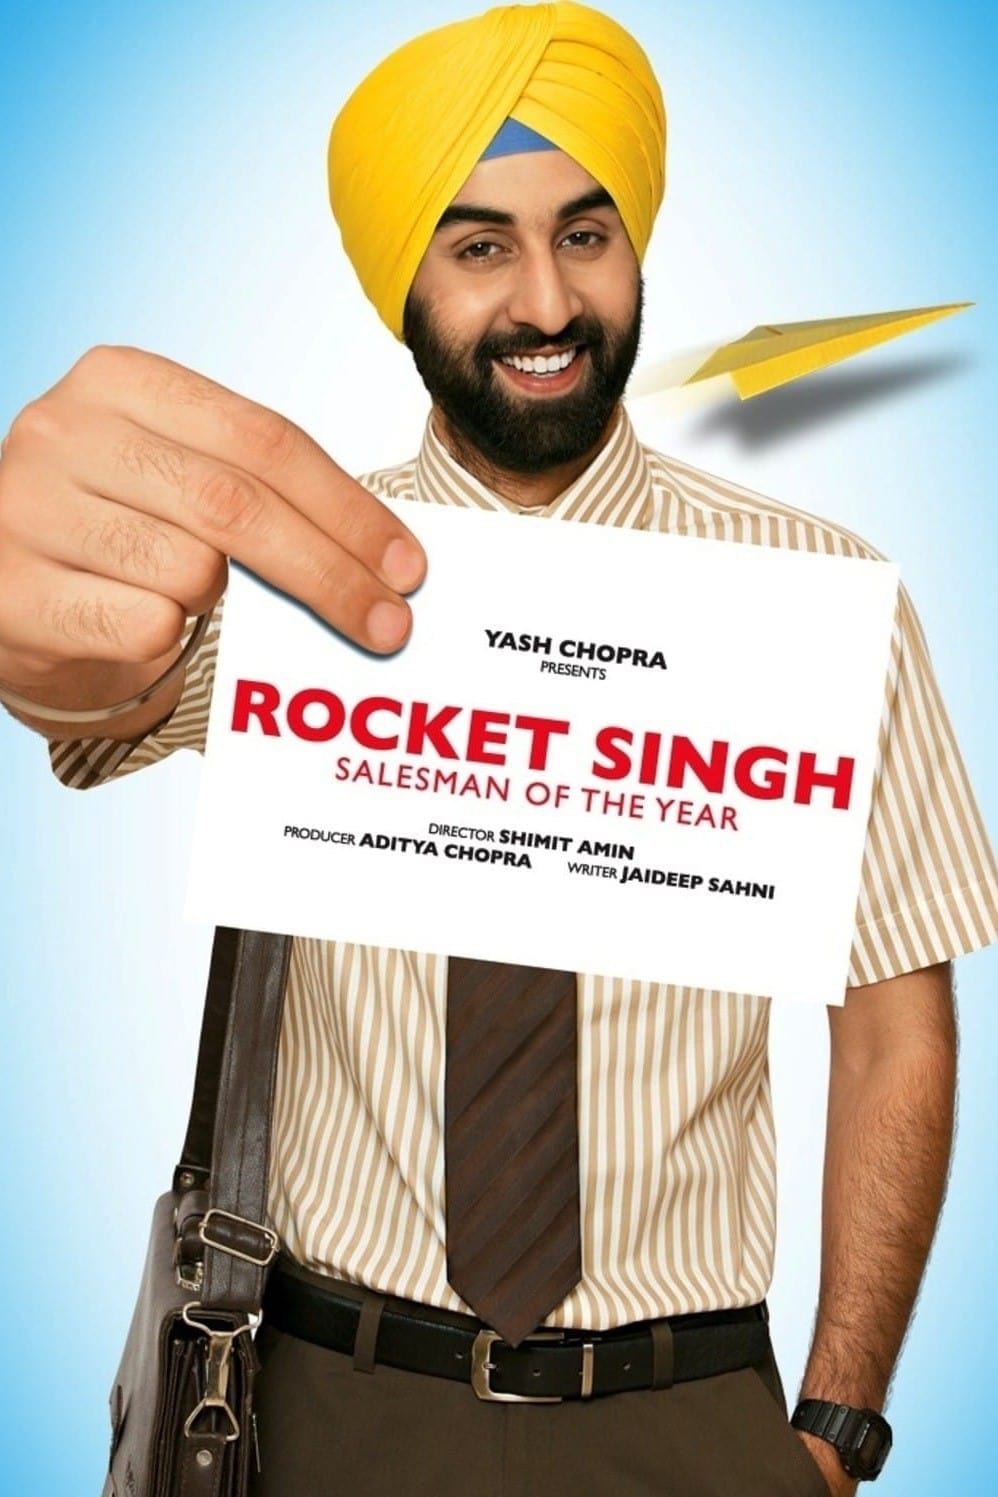 Poster for the movie "Rocket Singh: Salesman of the Year"